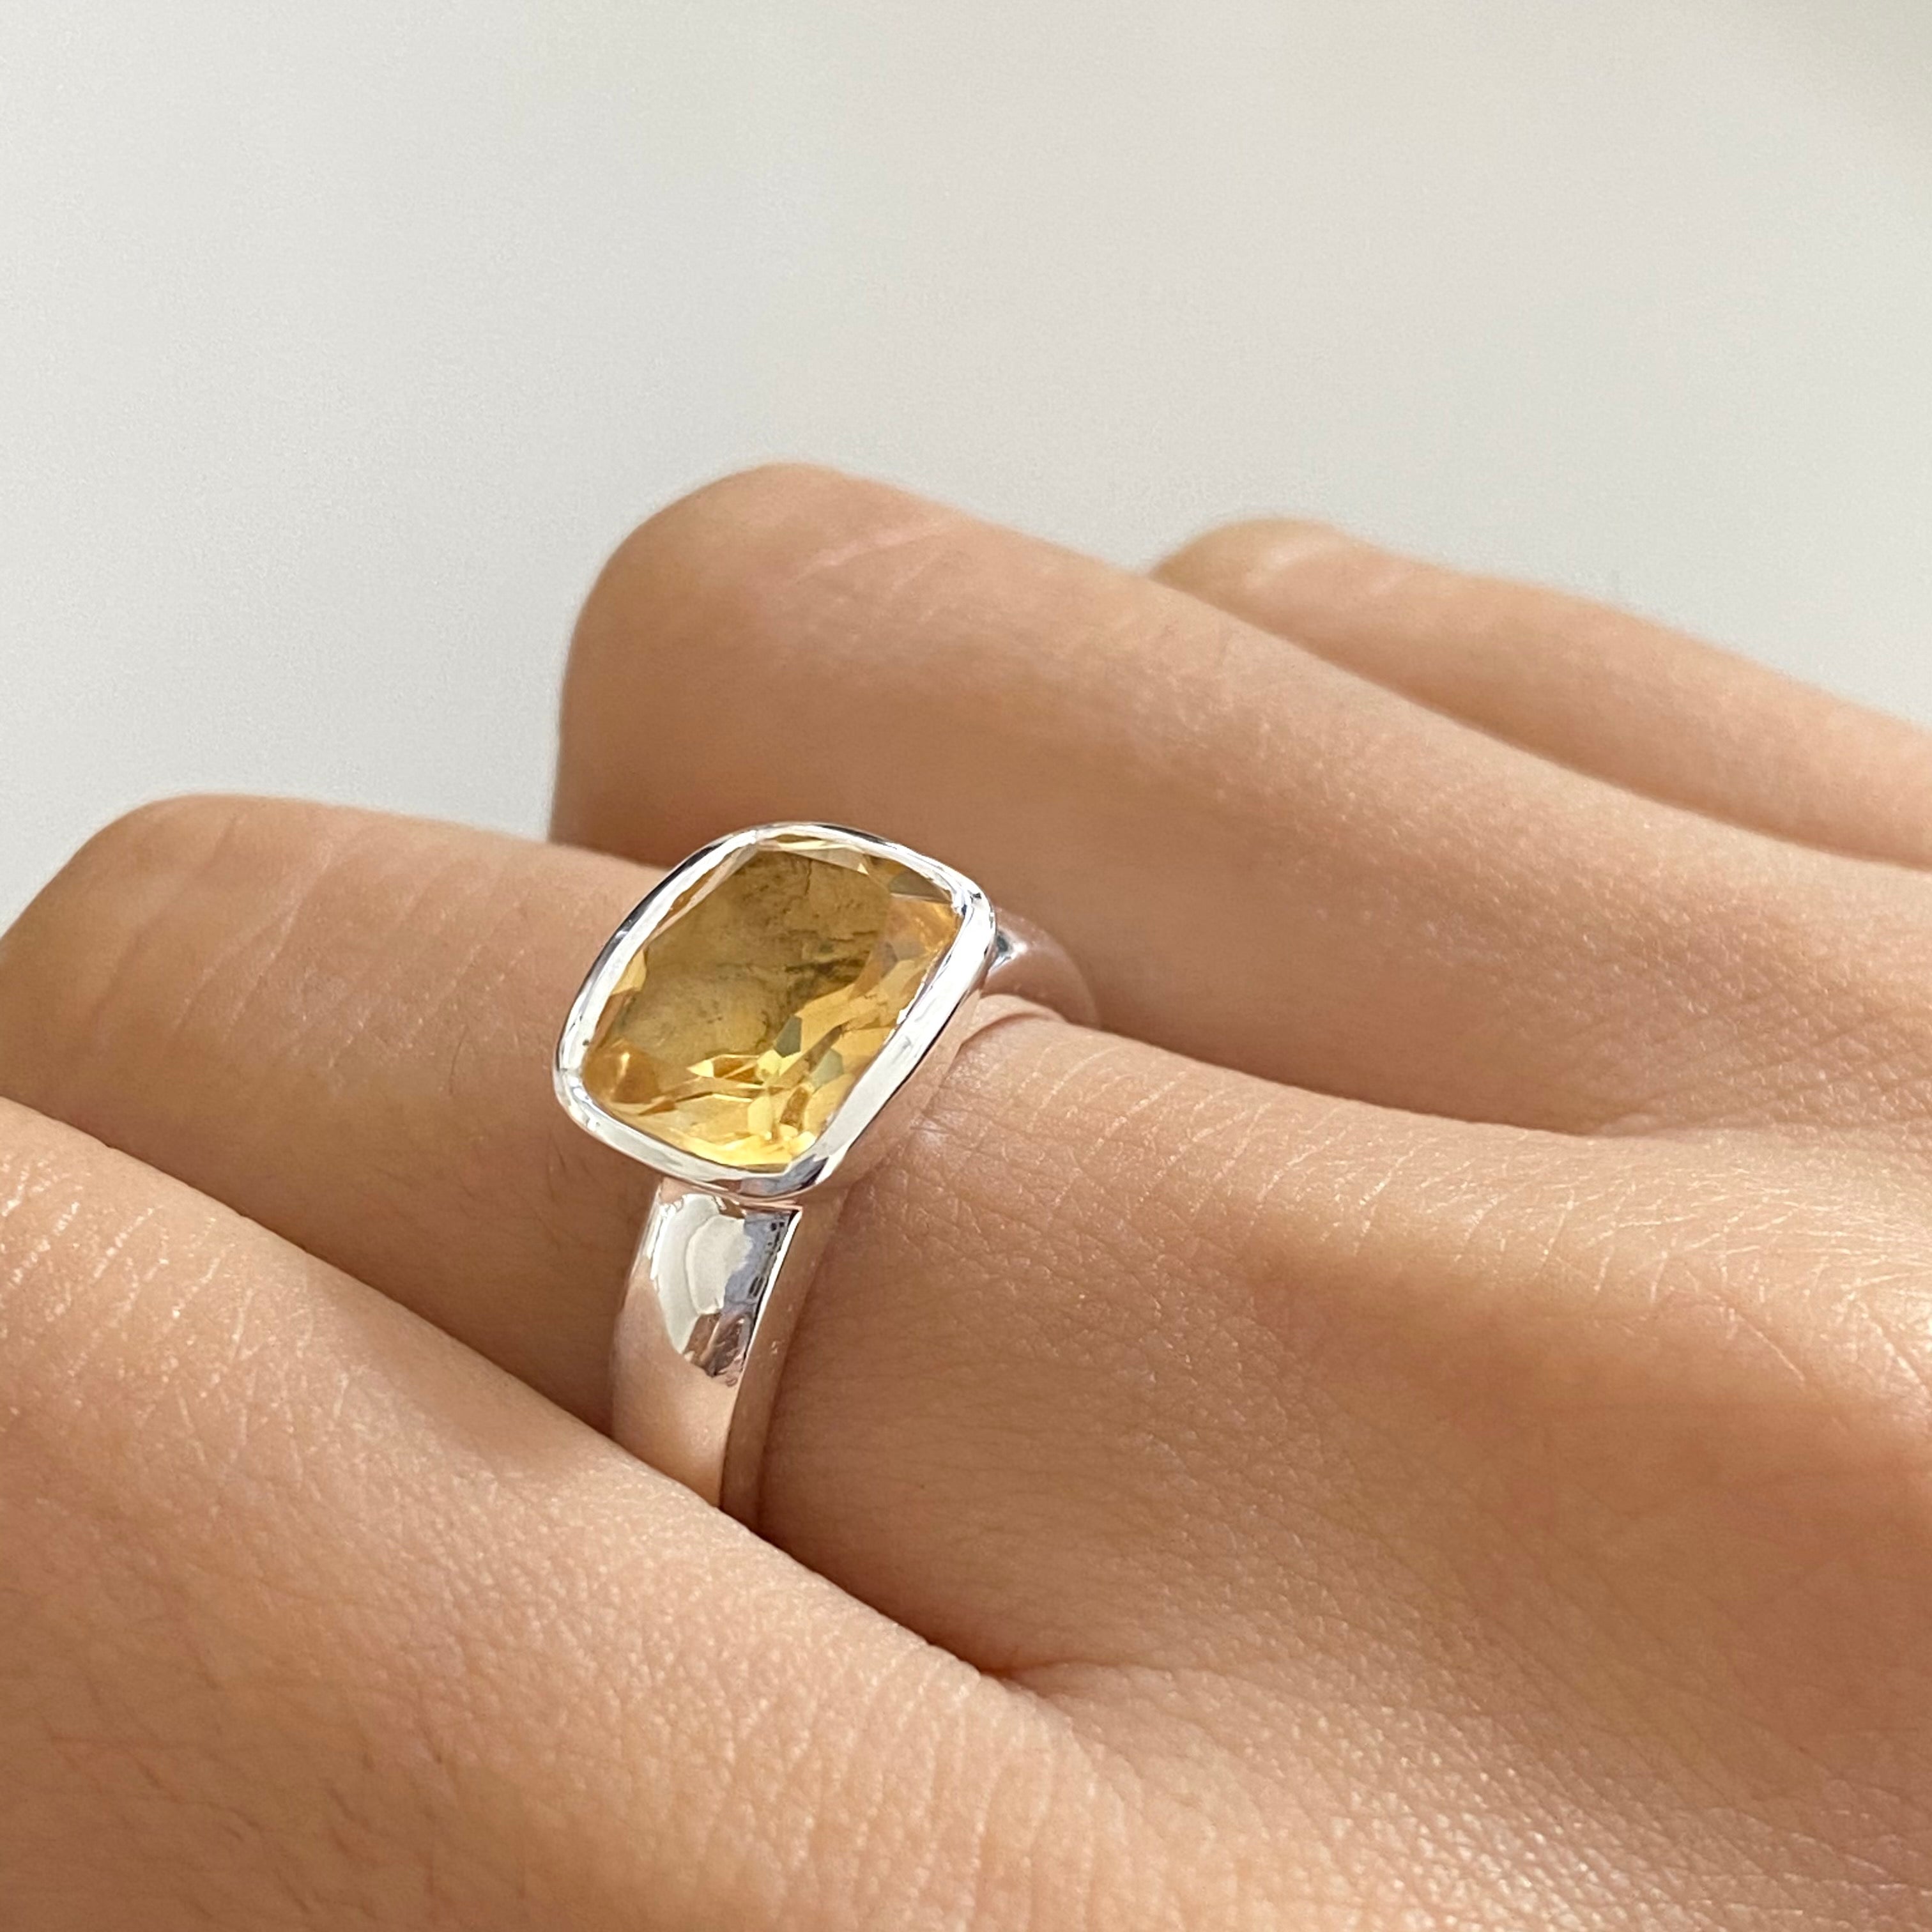 Faceted Rectangular Cut Natural Gemstone Sterling Silver Ring - Citrine